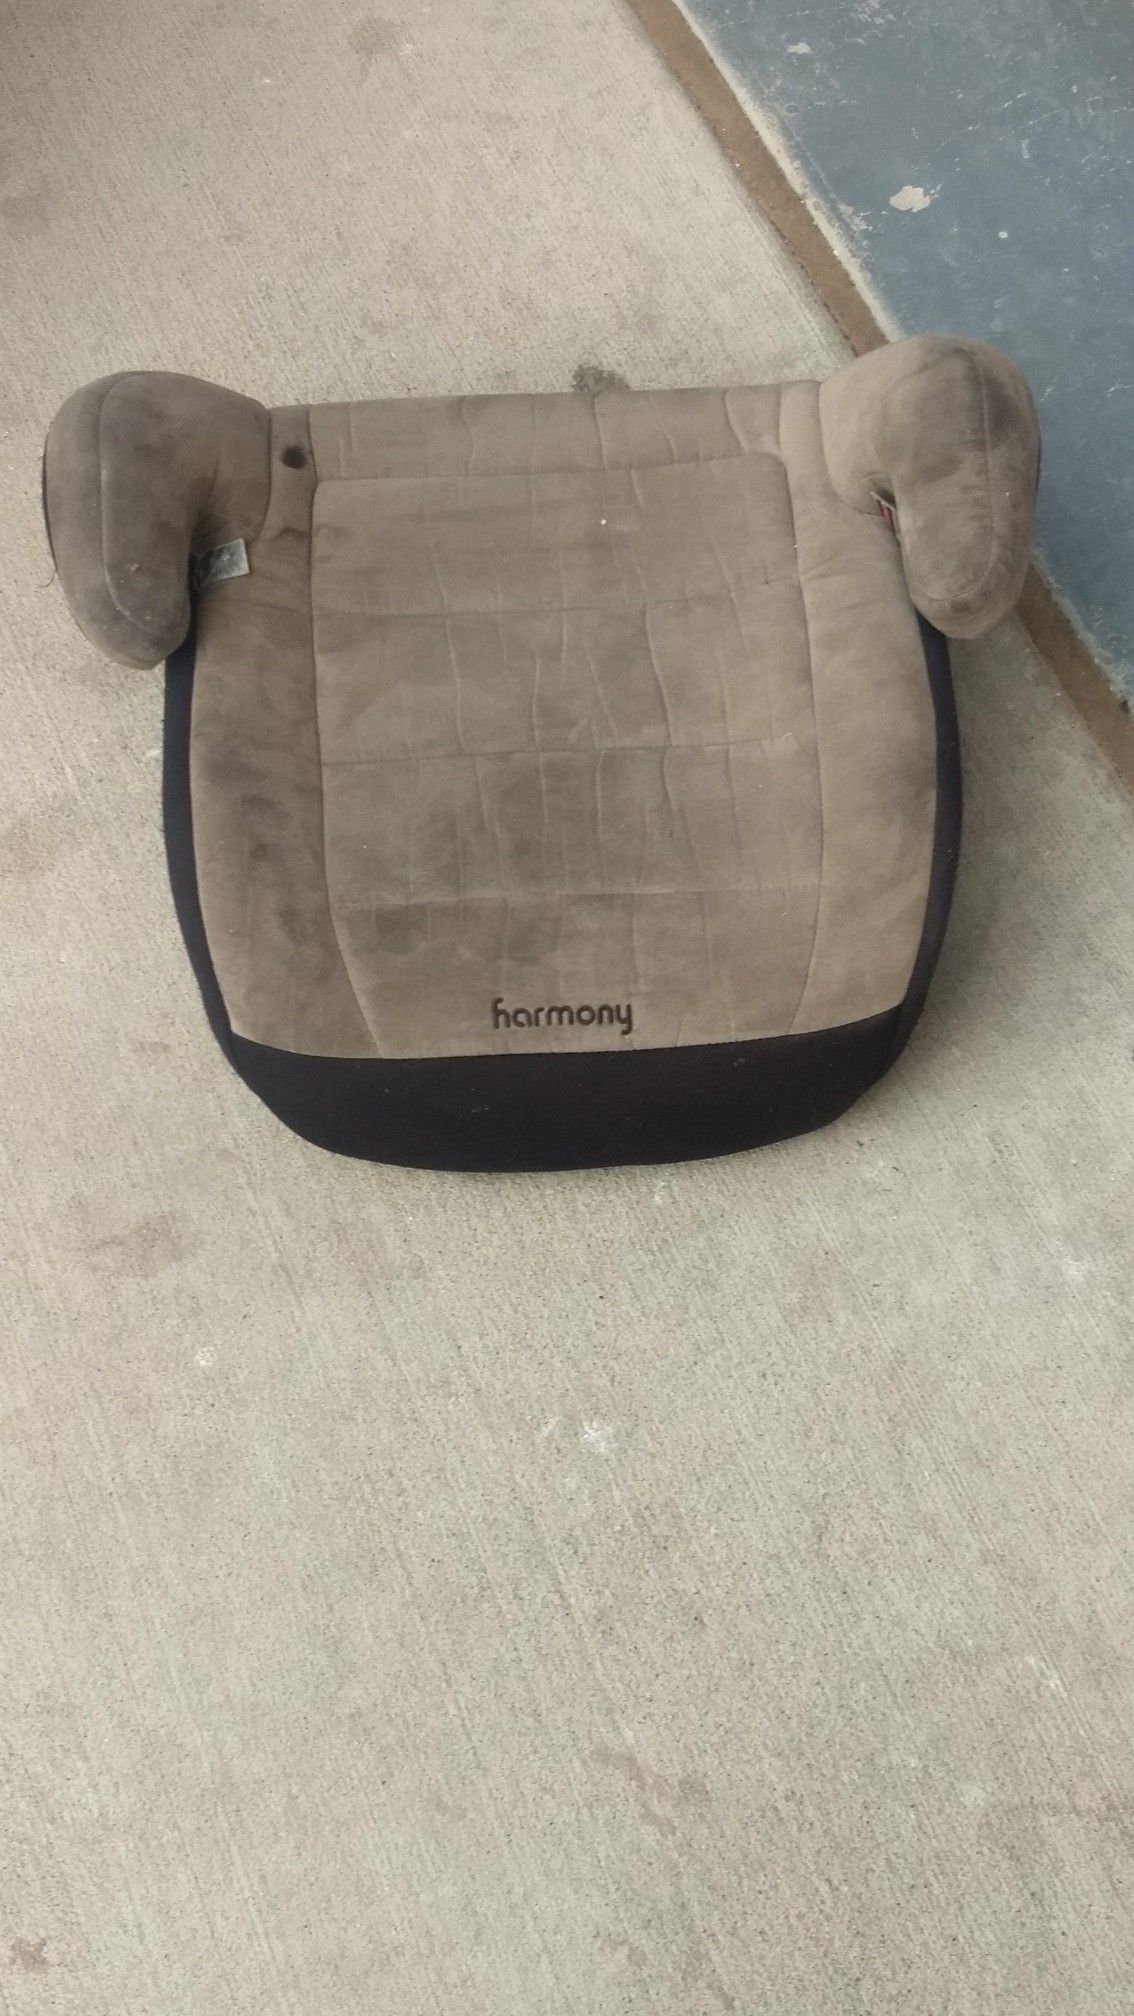 Harmony brand booster seat